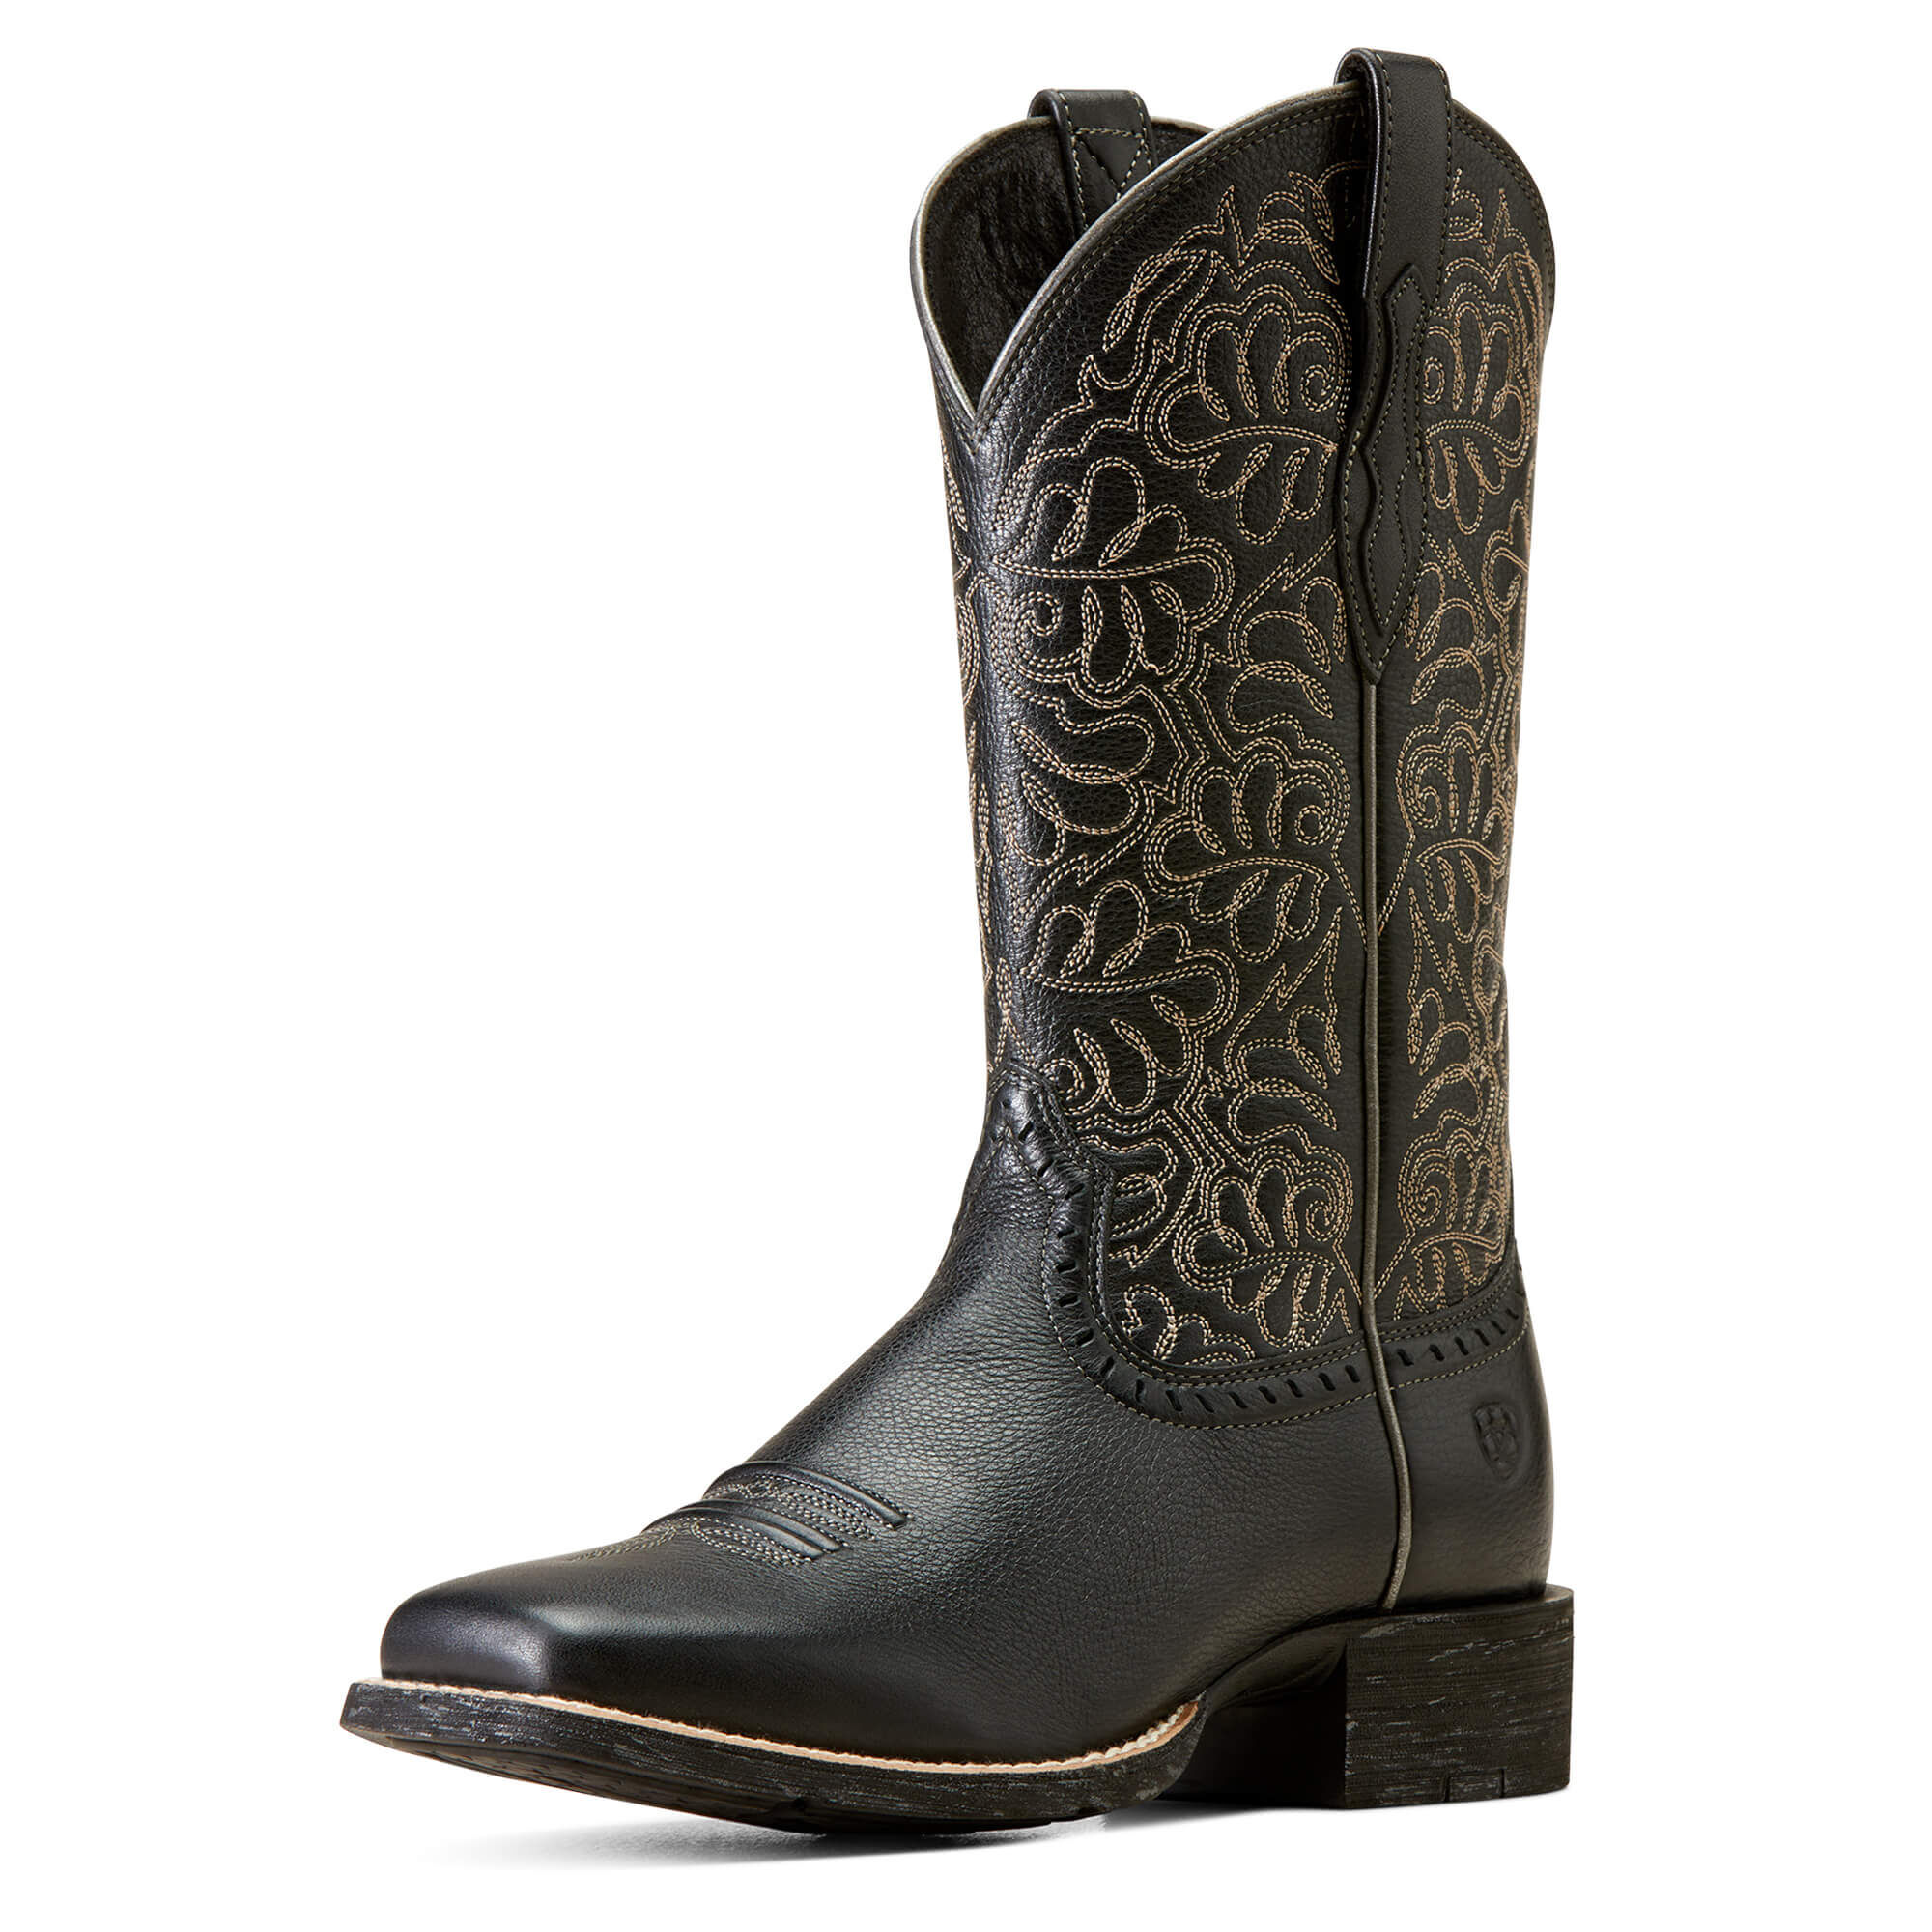 Cowboy Boots \u0026 Cowgirl Boots | Ariat